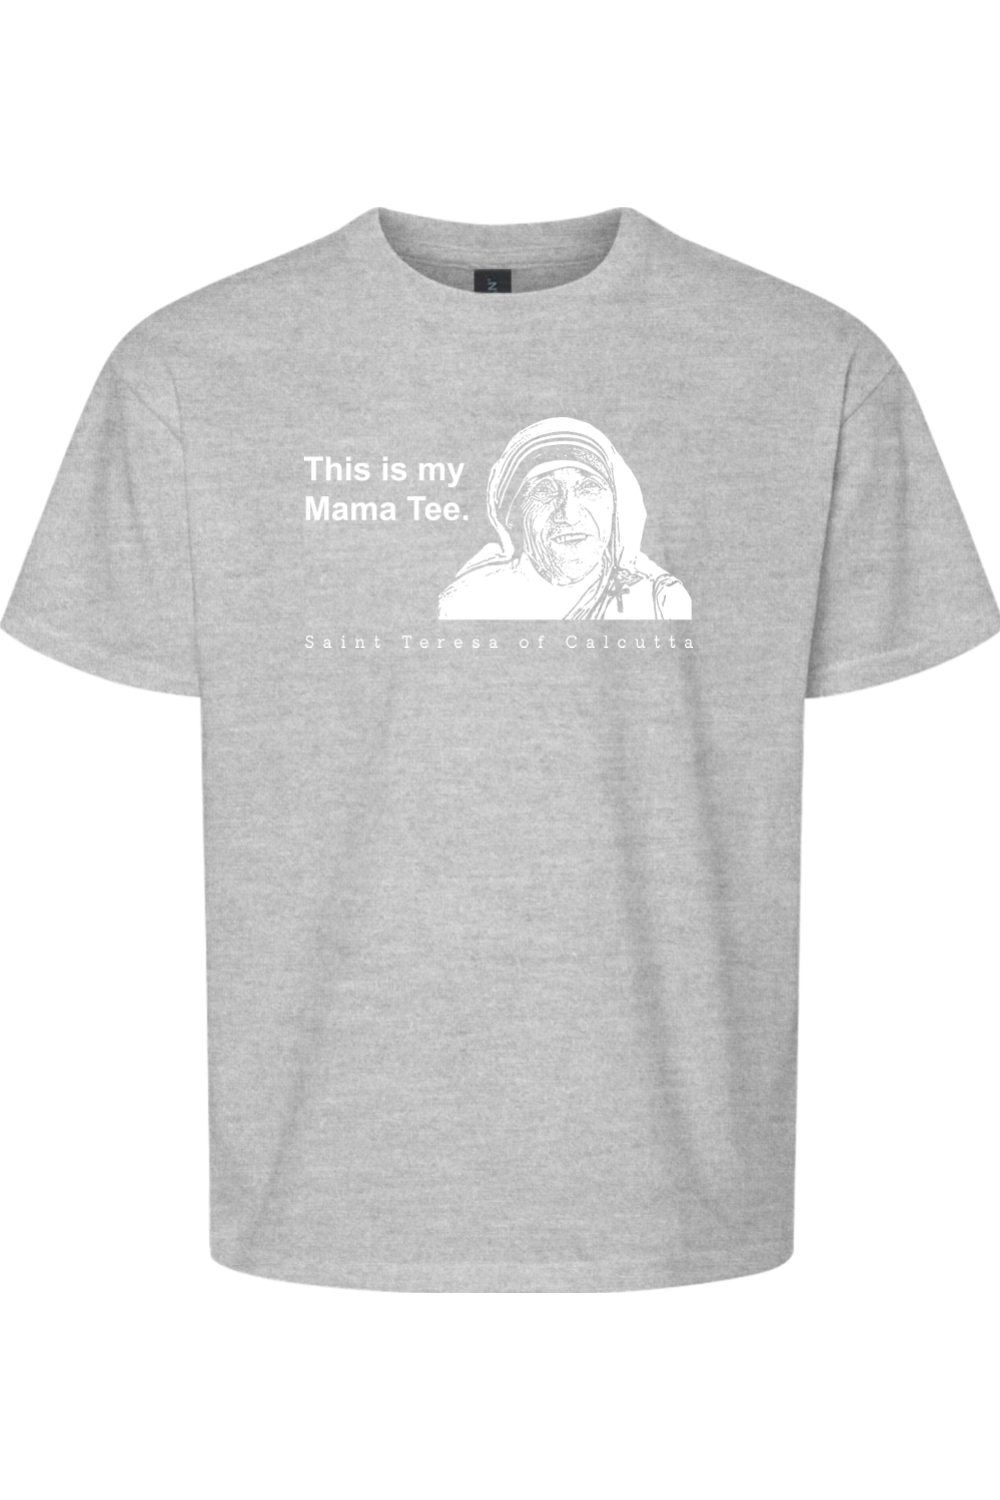 This is my Mama Tee - St. Teresa of Calcutta T-Shirt - youth